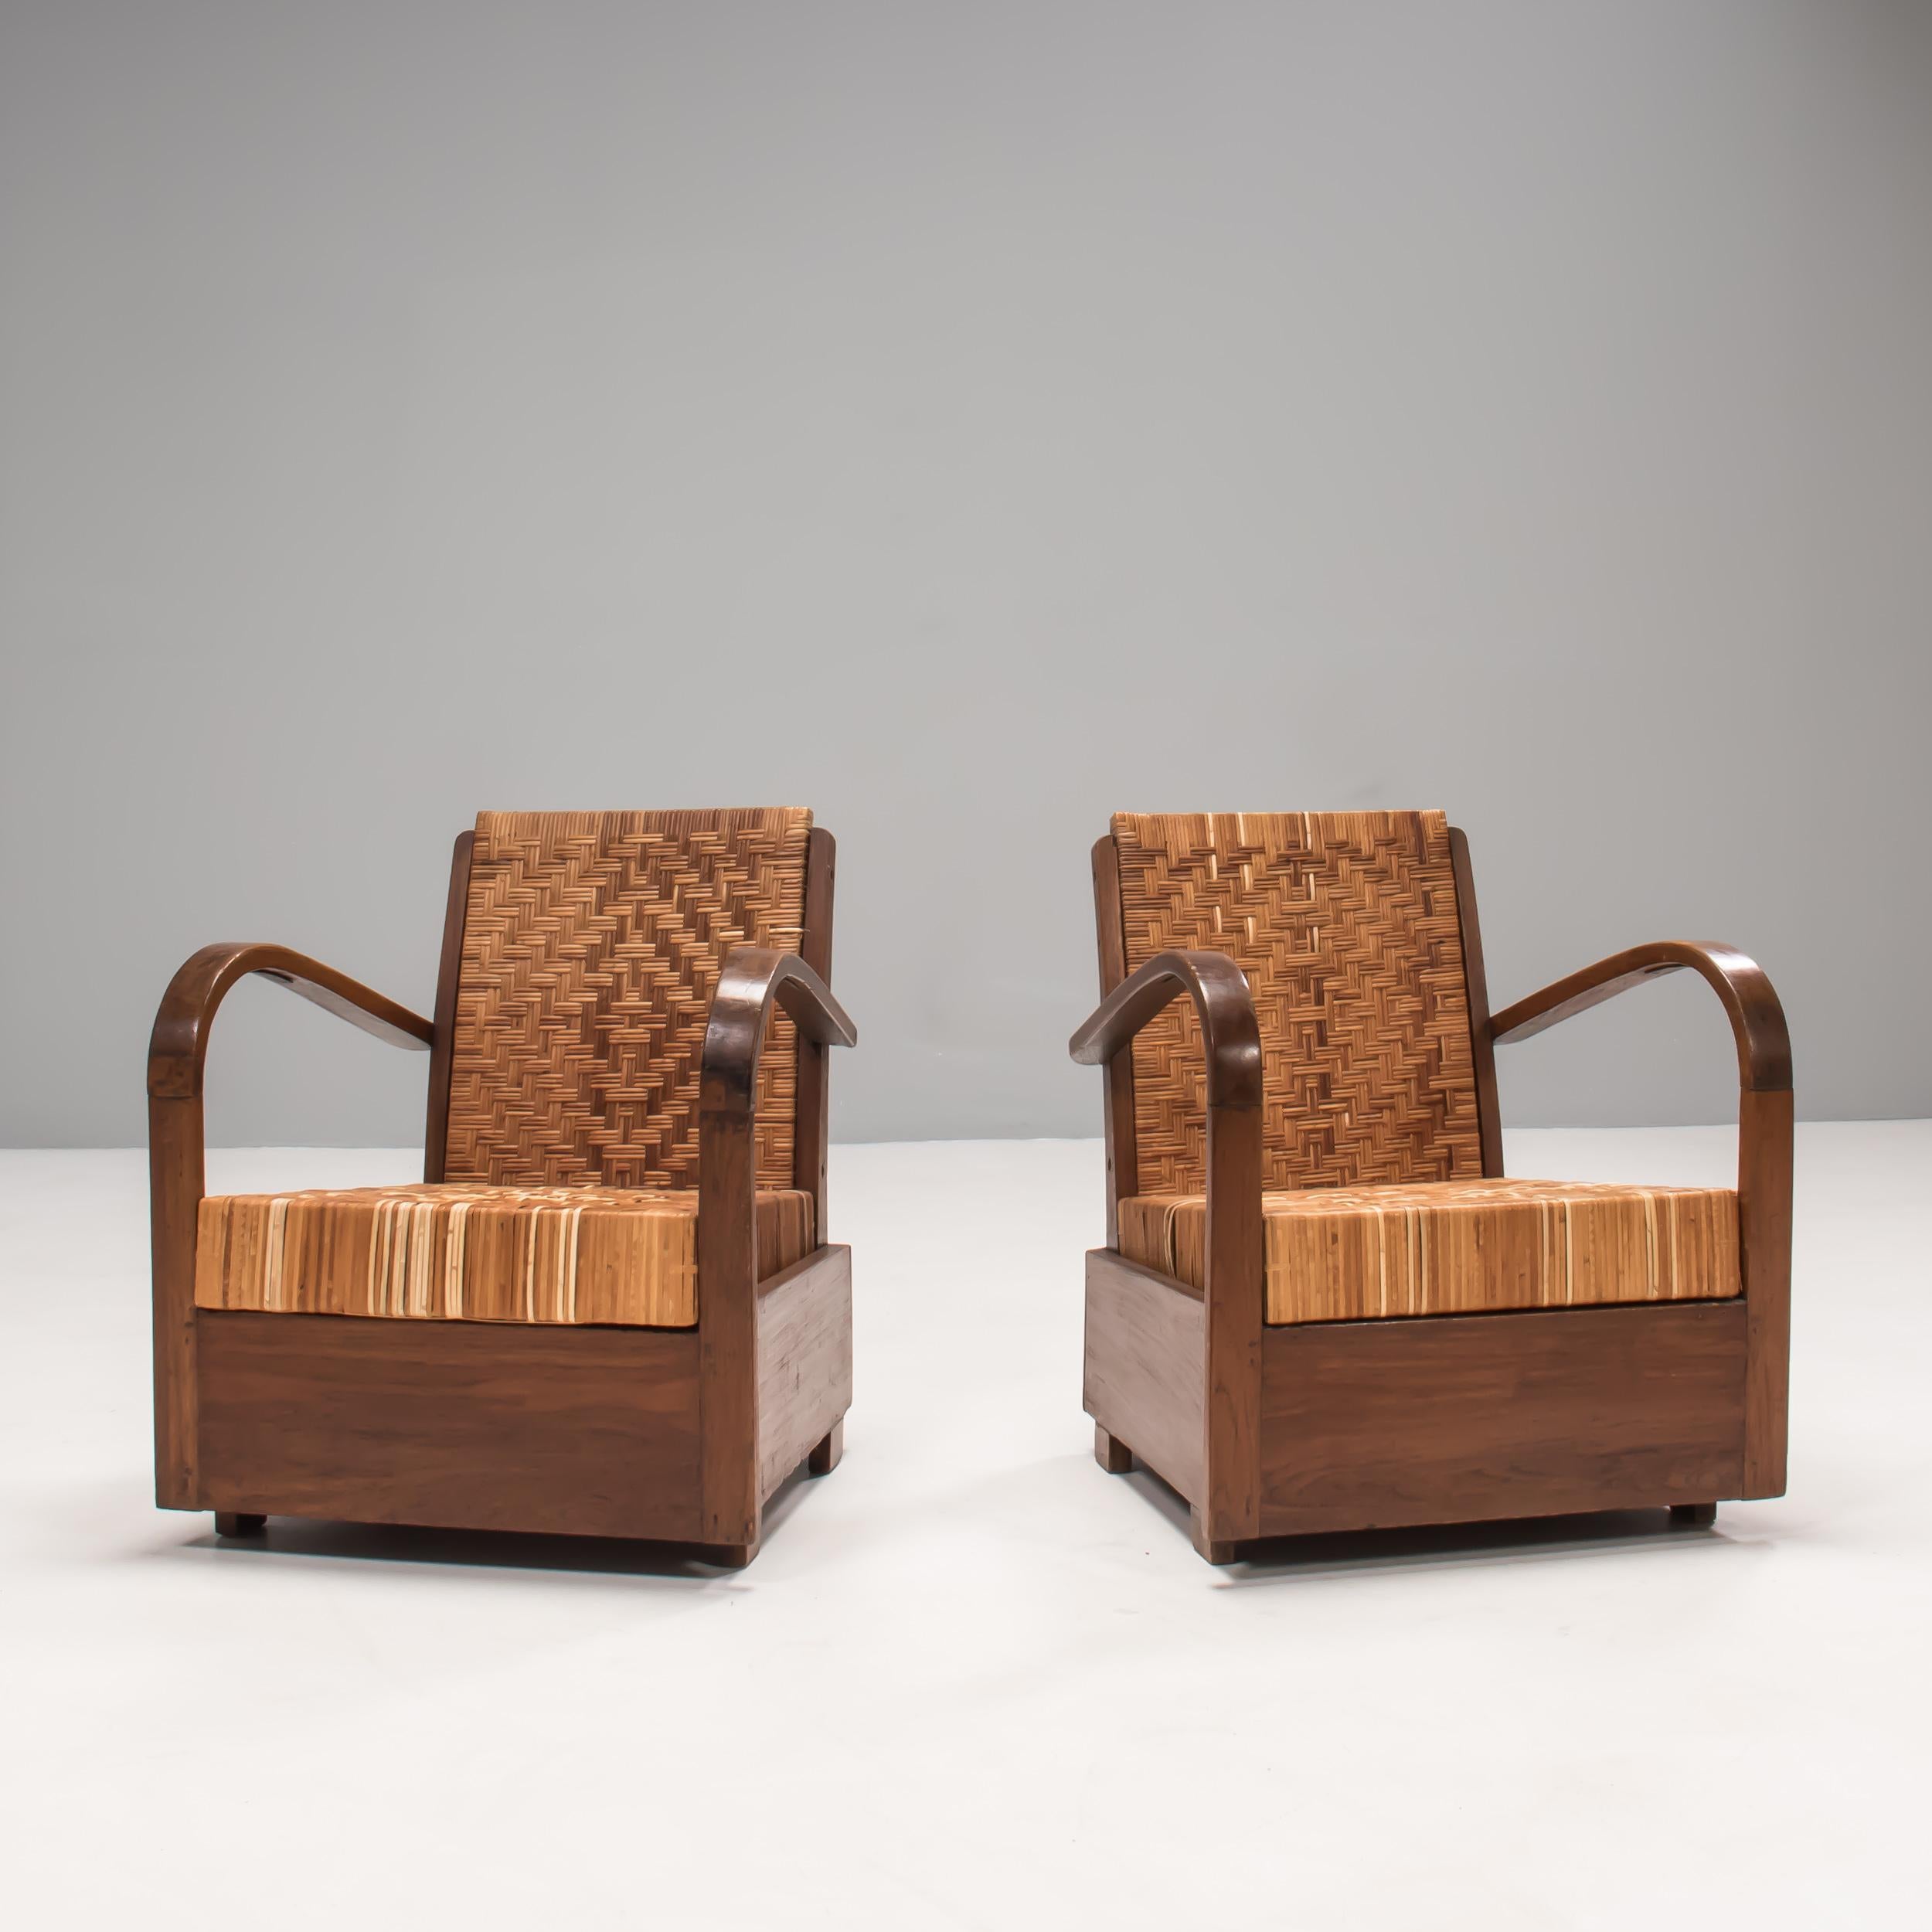 A truly beautiful pair of Art Deco armchairs, designed in the colonial style.

Featuring a teak wood block base and bentwood arms, the seats and backrests are upholstered in cane, with one chair featuring a herringbone pattern and the other a